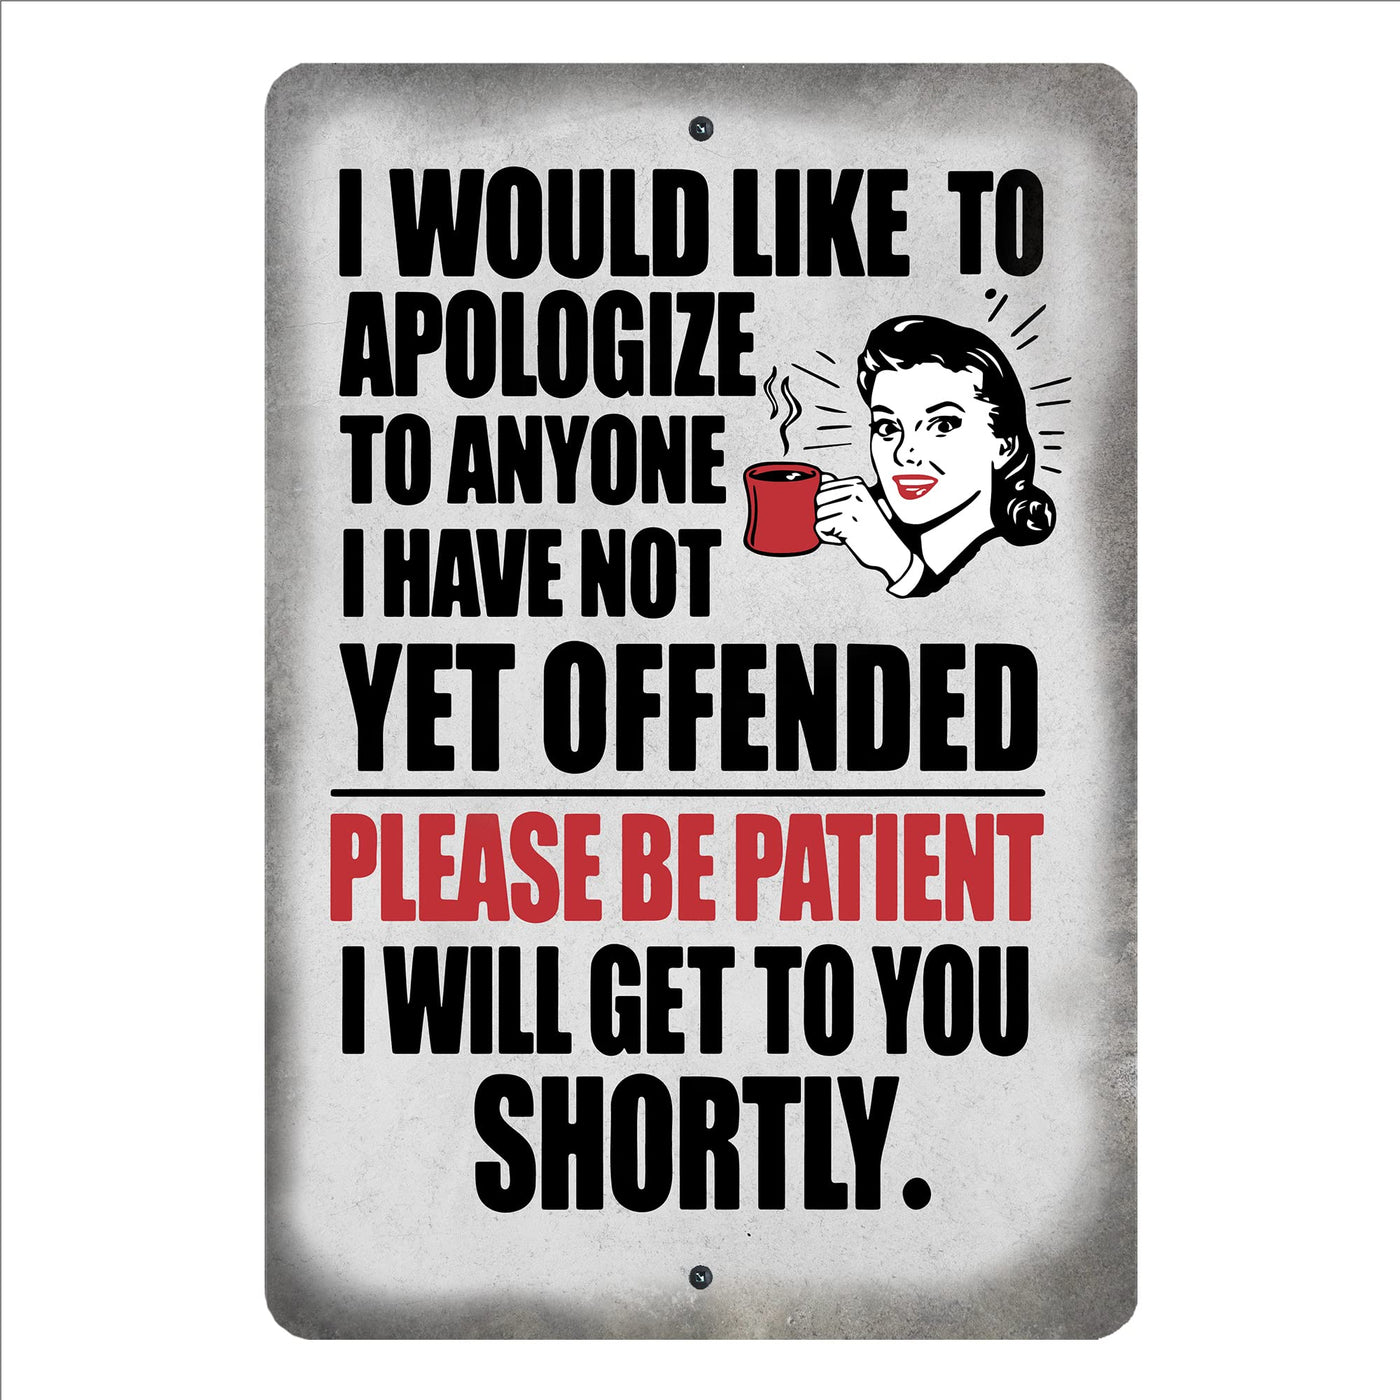 Please Be Patient- Get to You Shortly Metal Signs Vintage Wall Art -12x18" Funny Rustic Sign -Home-Kitchen-Patio Decor. Retro Tin Sign. Bar-Garage-Cave-Shop Decor & Fun Sarcastic Gifts! (X-Large)